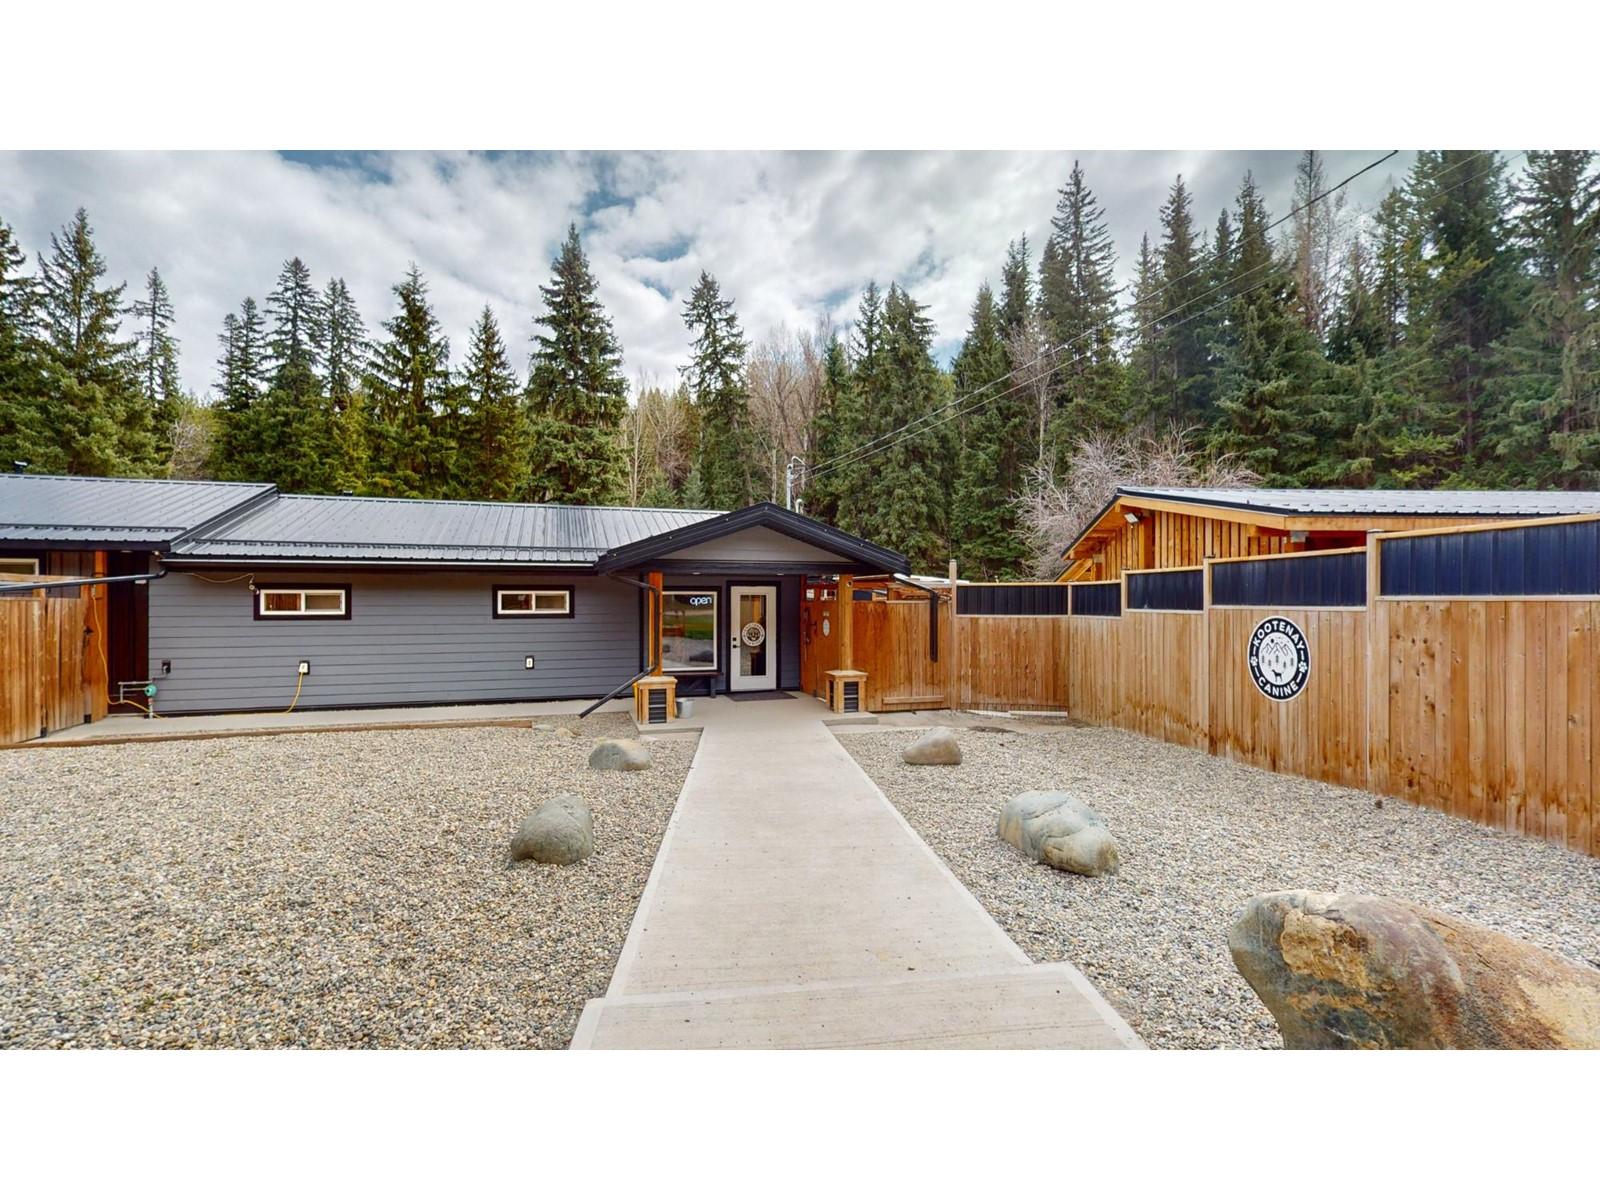 












5771 WYCLIFFE PERRY CREEK ROAD

,
Wycliffe,




British Columbia
V1C7C7

